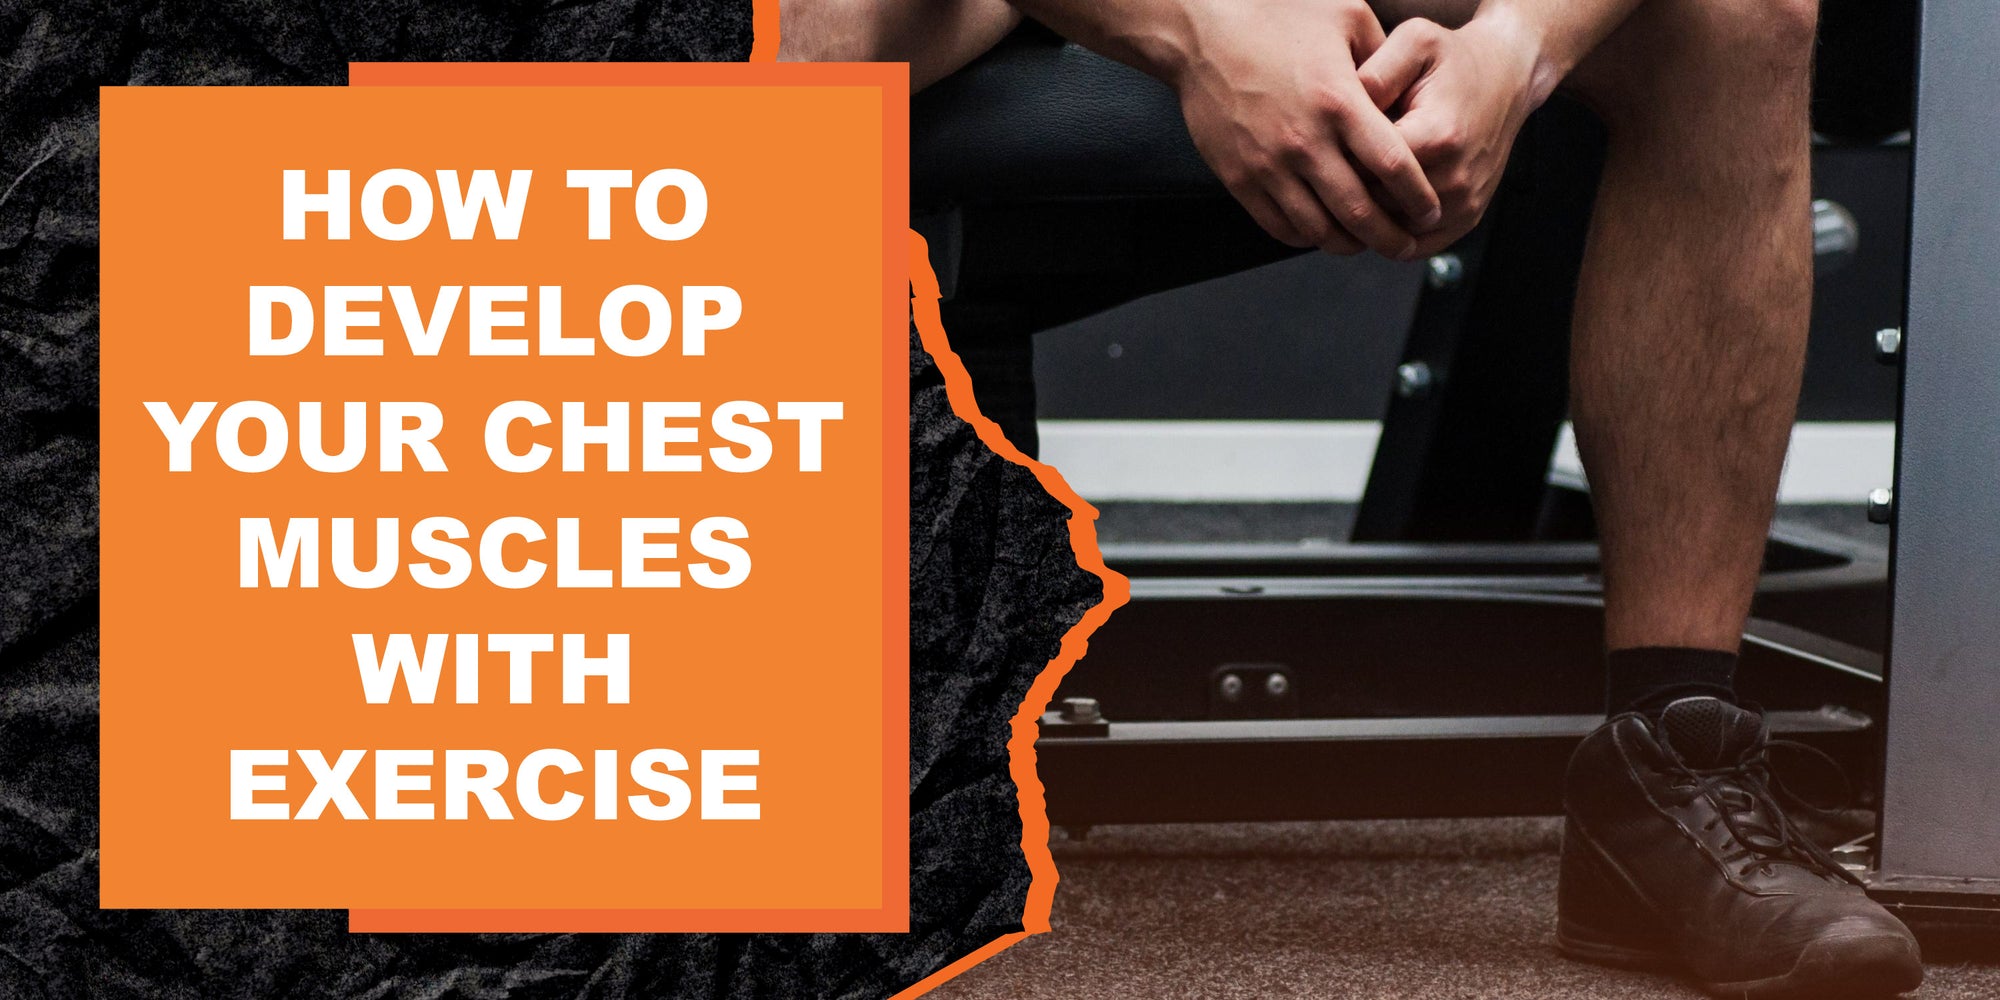 How to Develop Your Chest Muscles with Exercise